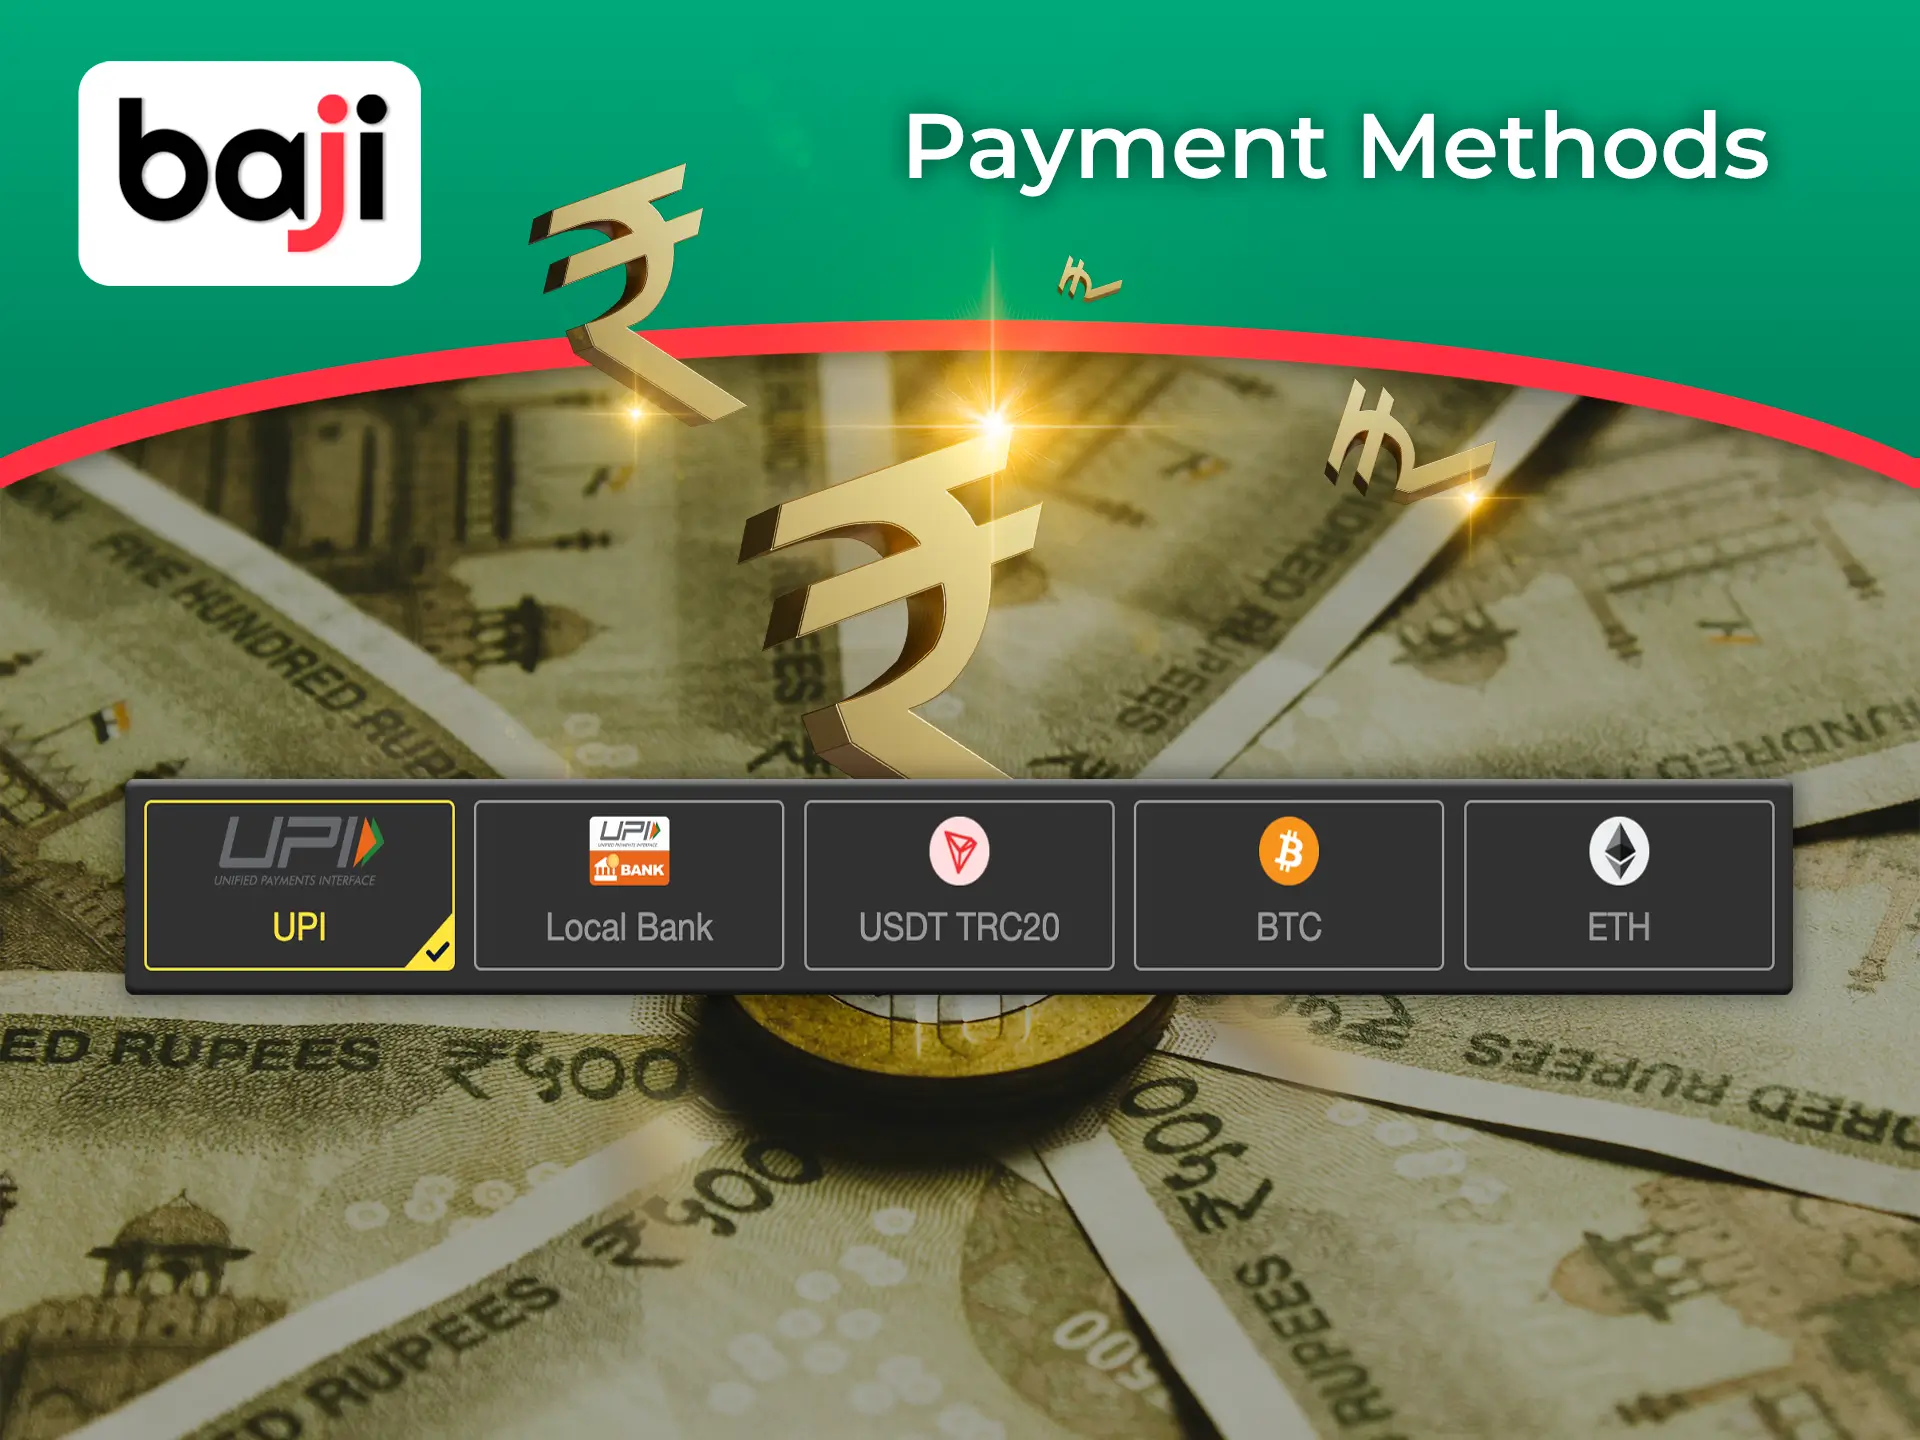 Choose the right and best recharge method for you on the Baji website.